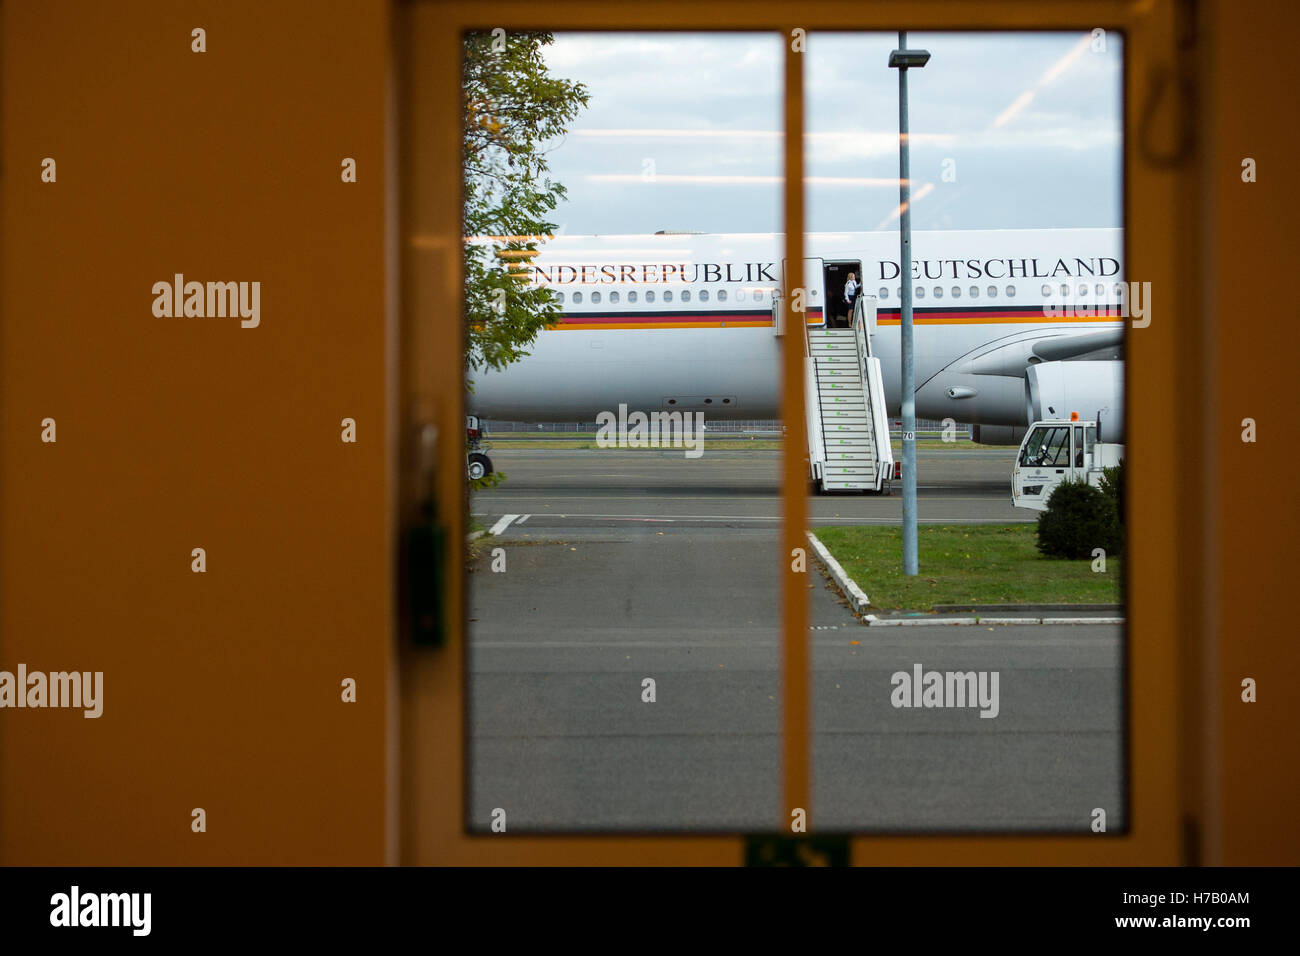 The Airbus A340 'Konrad Adenauer' of the German Air Force can be seen through a window in the military sector of Tegel Airport in berlin, Germyn, 29 October 2016. Photo: GREGOR FISCHER/dpa Stock Photo